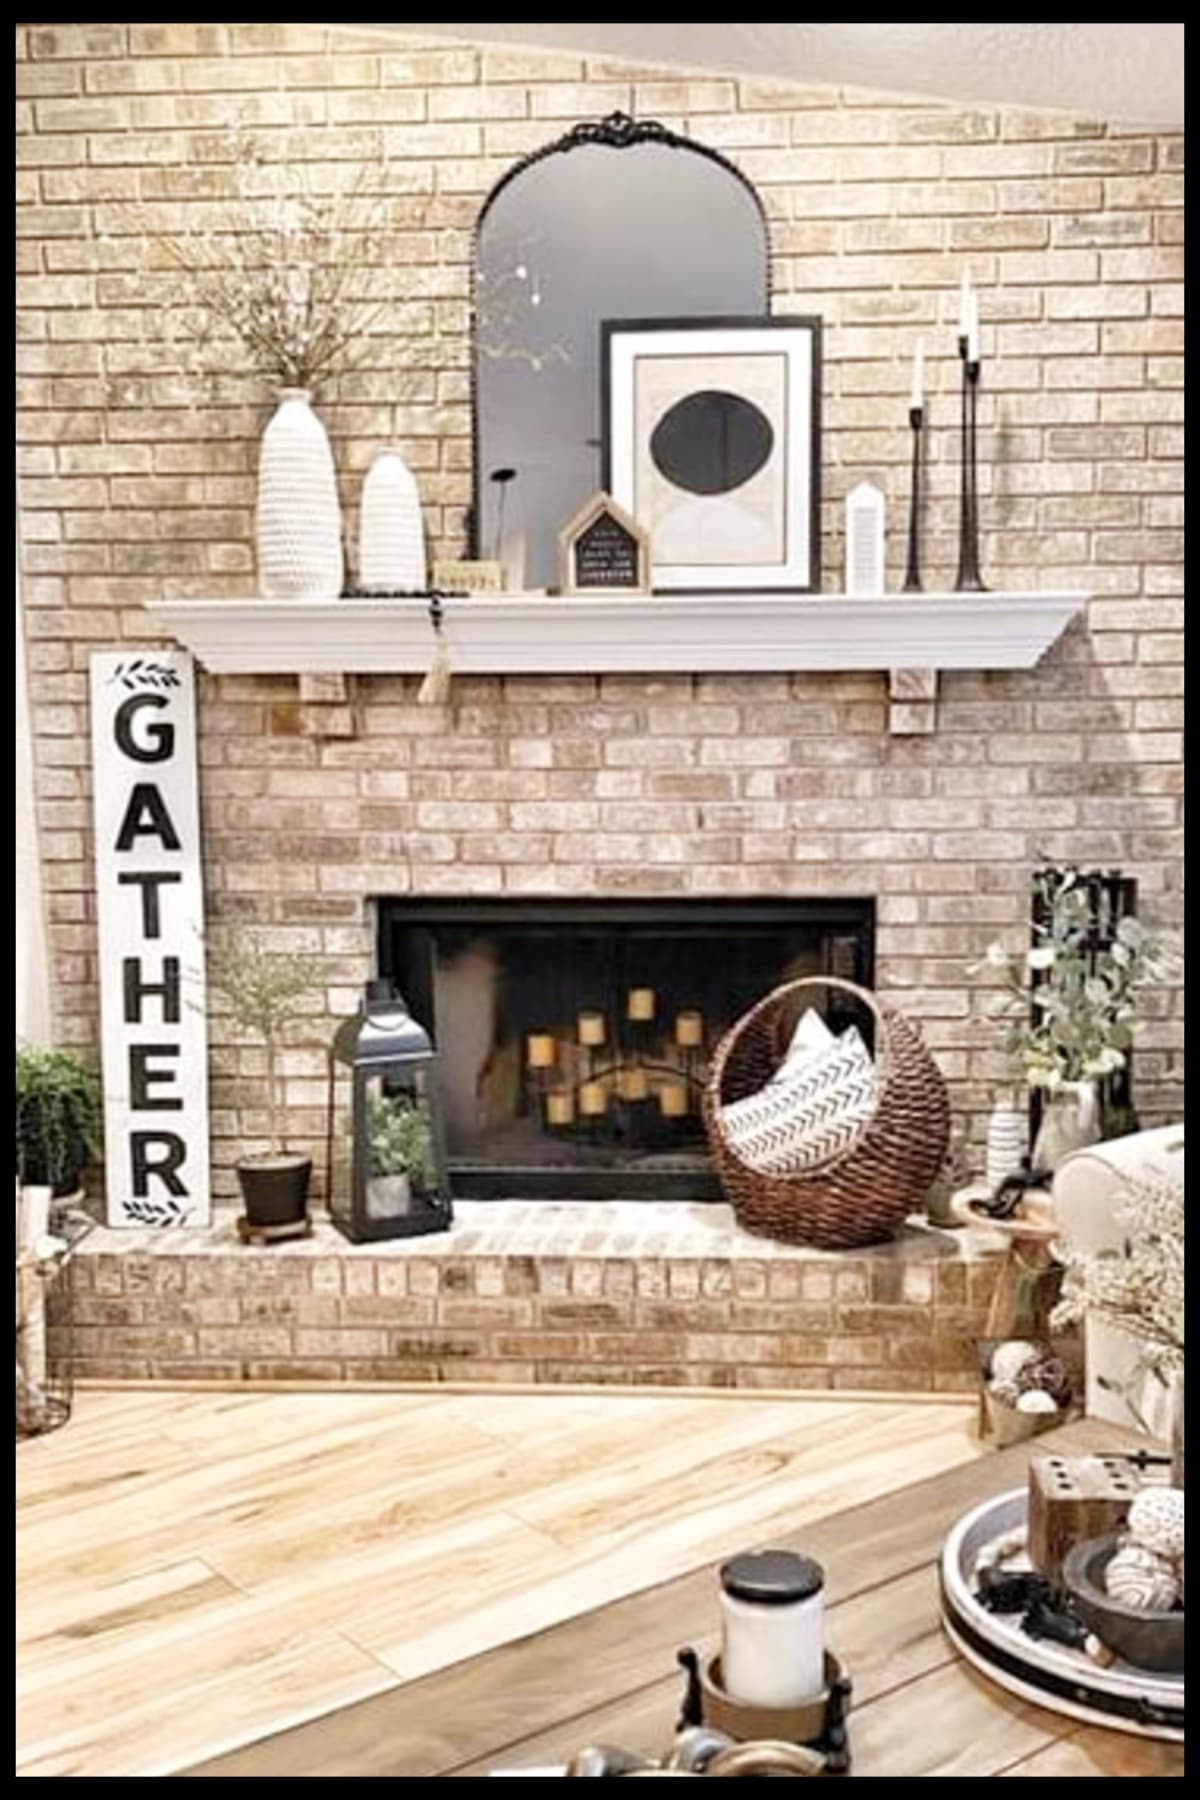 farmhouse fireplace ideas with floating mantel shelf, large gather wood sign, baskets, mirror and other Joanna Gaines style decor